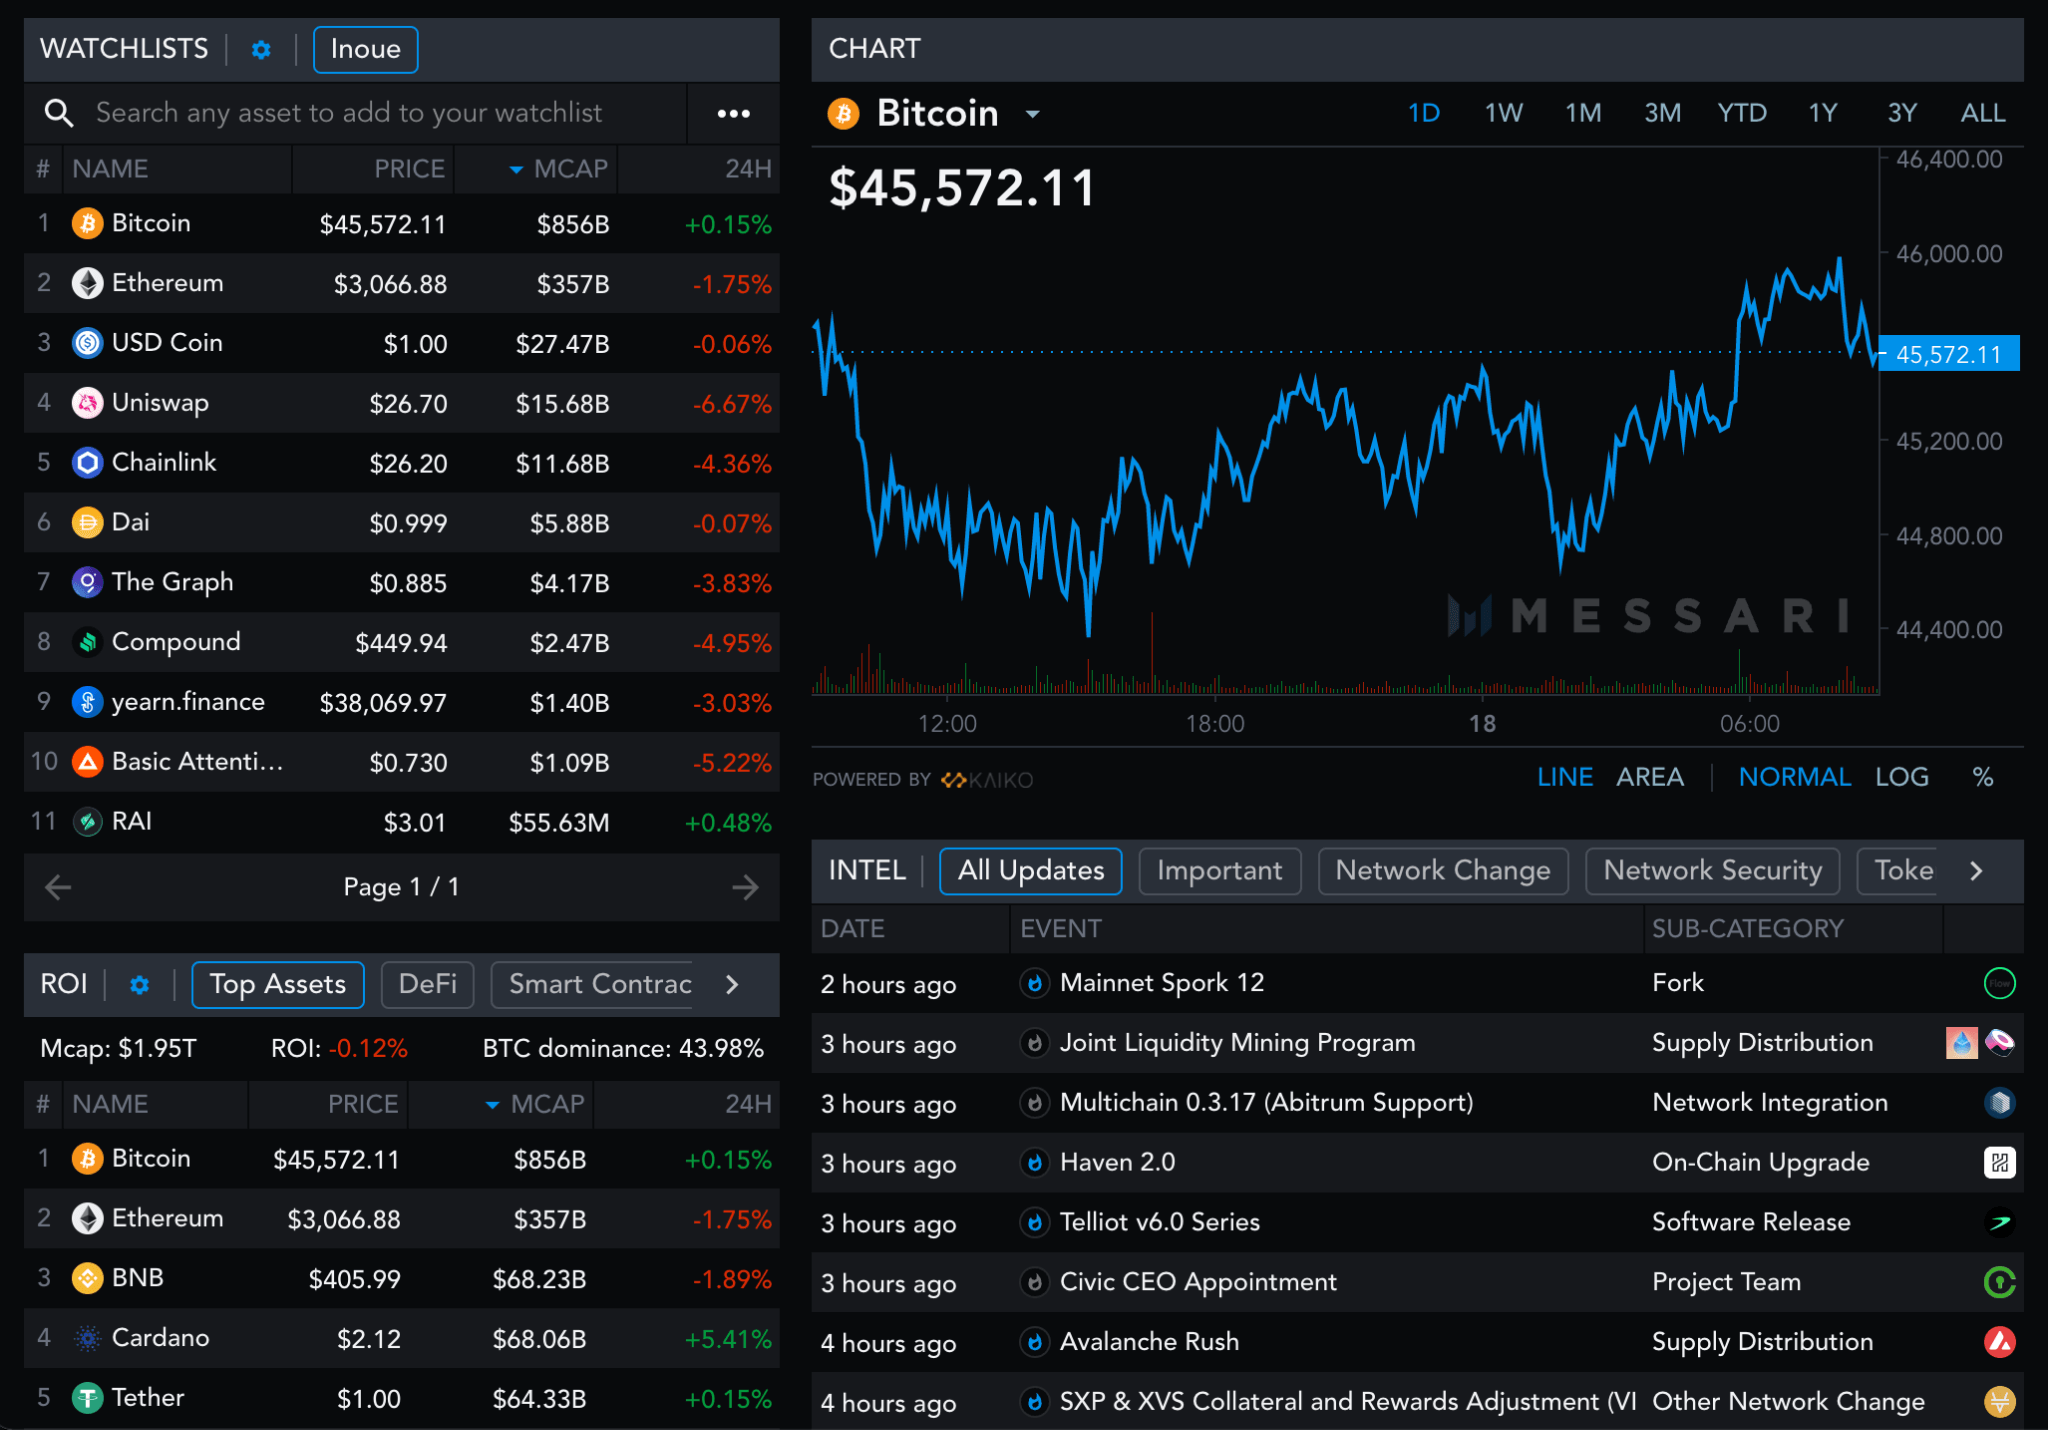 Messari dashboard with a dark background. The dashboard consists of four parts: 1) watchlist tracking assets like Bitcoin or Ethereum, 2) ROI chart, 3) line graph showing real-time Bitcoin price data, and 4) Intel chart, a real-time alerting mechanism.